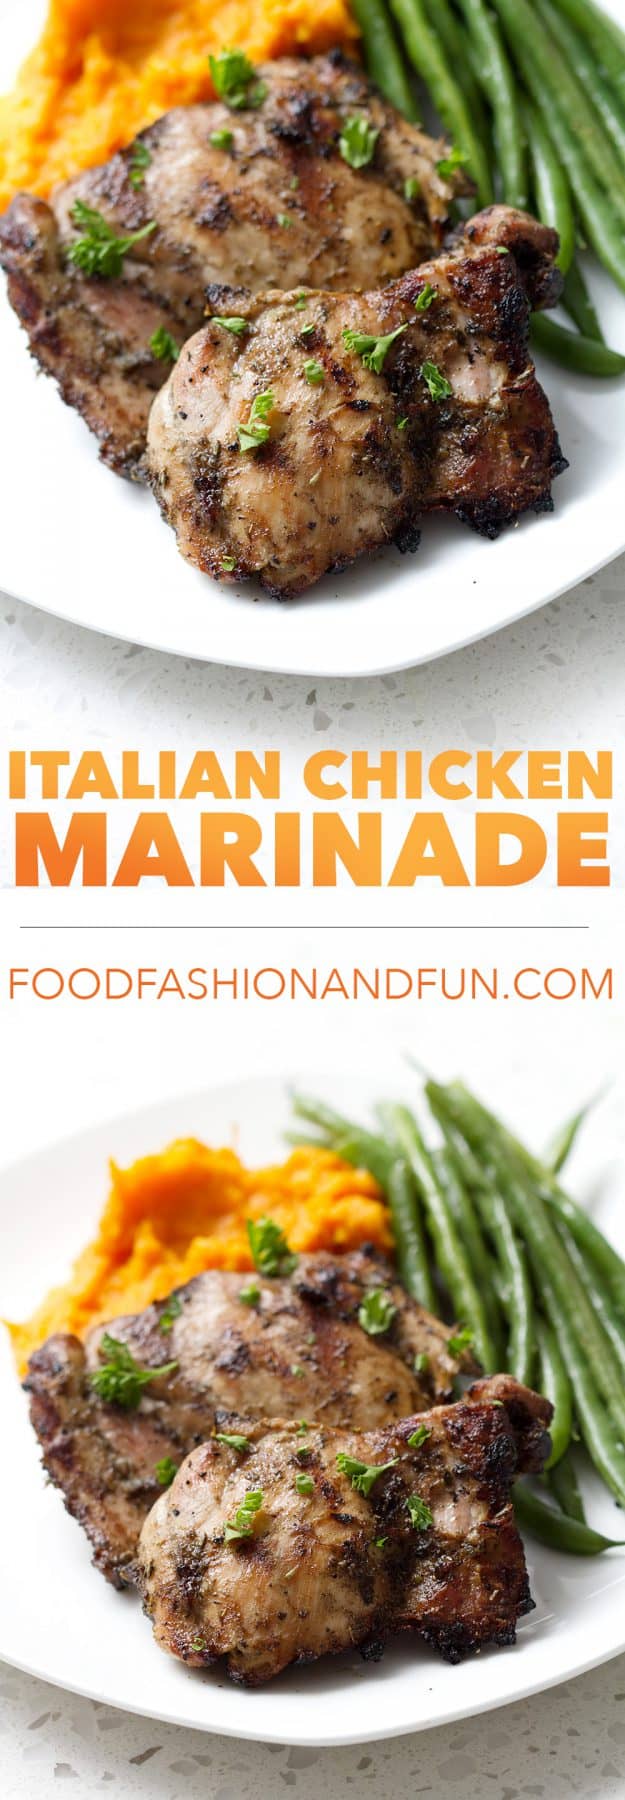 Get your summer grilling started with this 5 Minute Italian Chicken Marinade recipe. It’s only 5 ingredients and they’re all sitting in your pantry right now. This recipe is allergy friendly (gluten, dairy, nut, egg, soy and shellfish free) and suits the autoimmune protocol (AIP) and paleo diets.